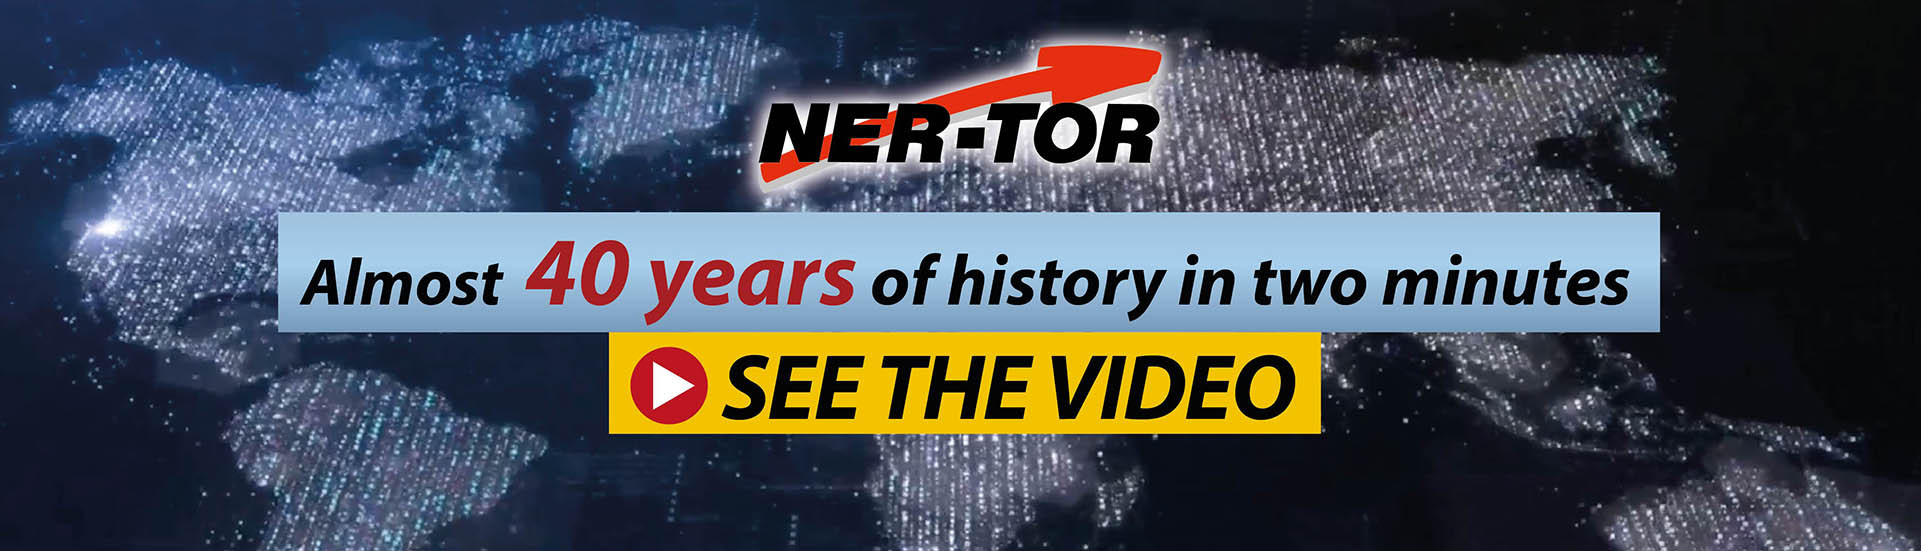 NER-TOR, Almost 40 years of history in two minutes